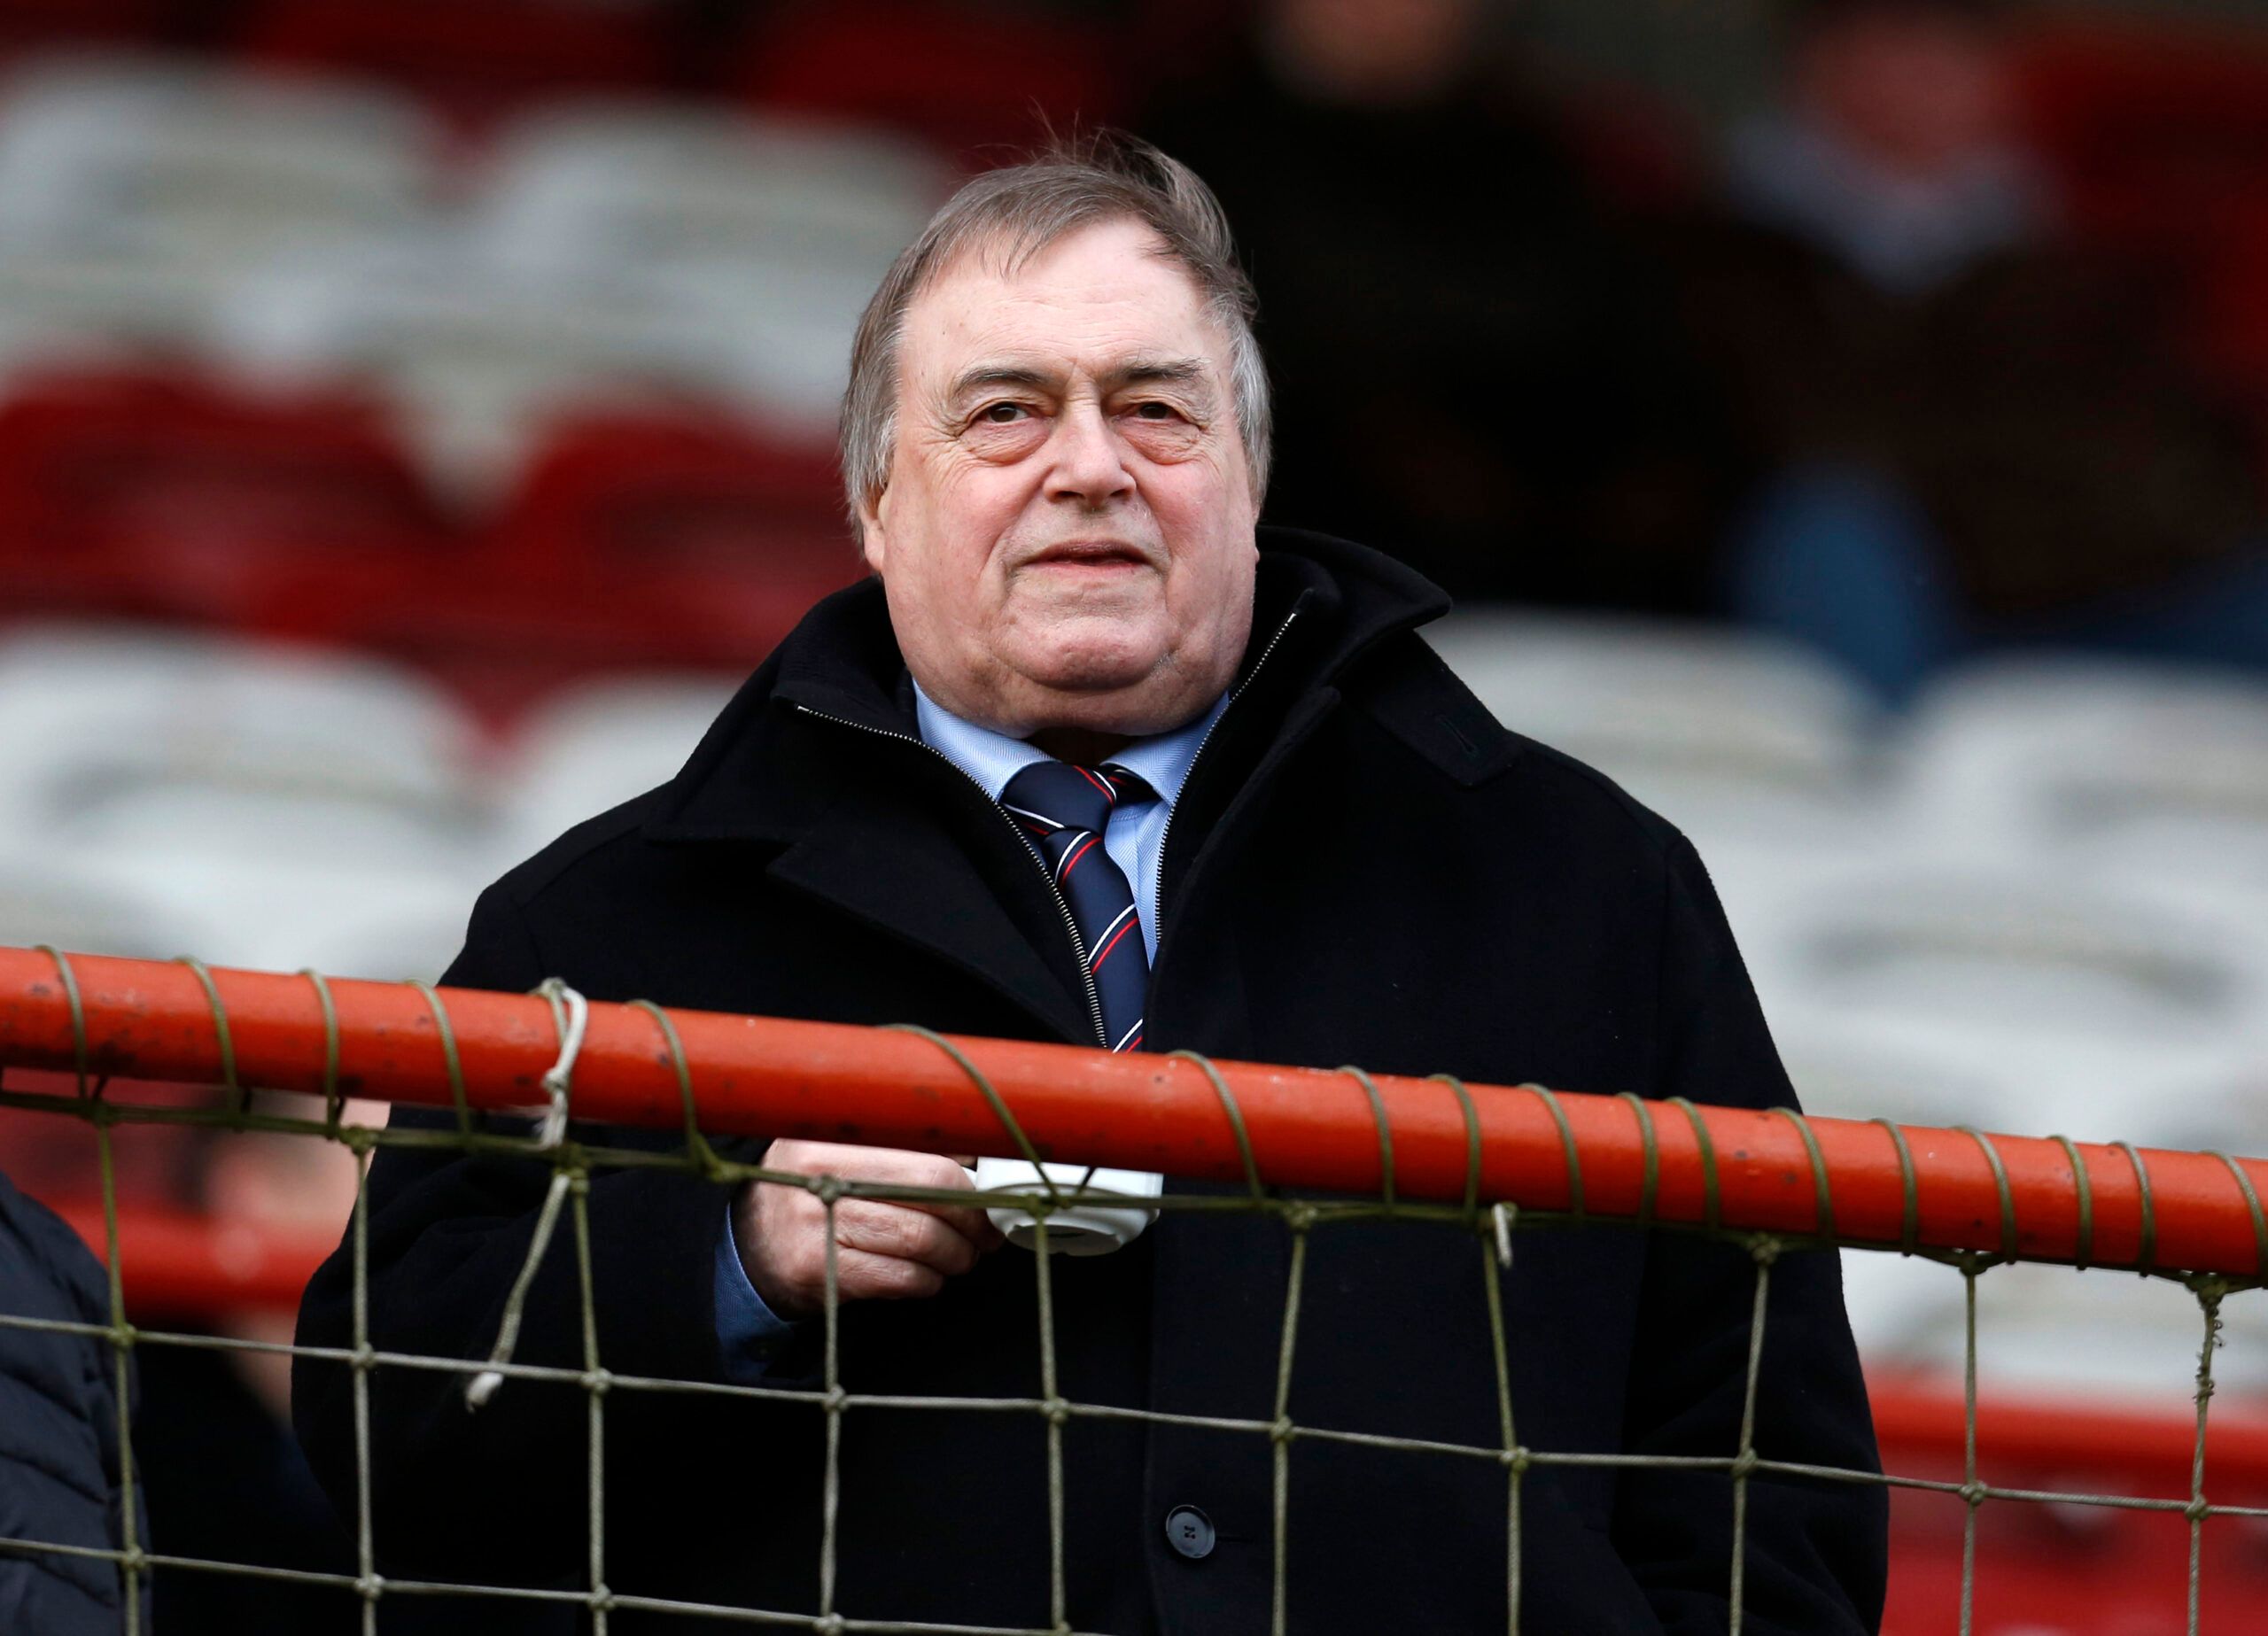 Rugby League - Hull Kingston Rovers v Castleford Tigers - First Utility Super League - KC Lightstream Stadium - 7/2/16 
Former Deputy Prime Minister John Prescott watches on from the stand 
Mandatory Credit: Action Images / Ed Sykes 
Livepic 
EDITORIAL USE ONLY.